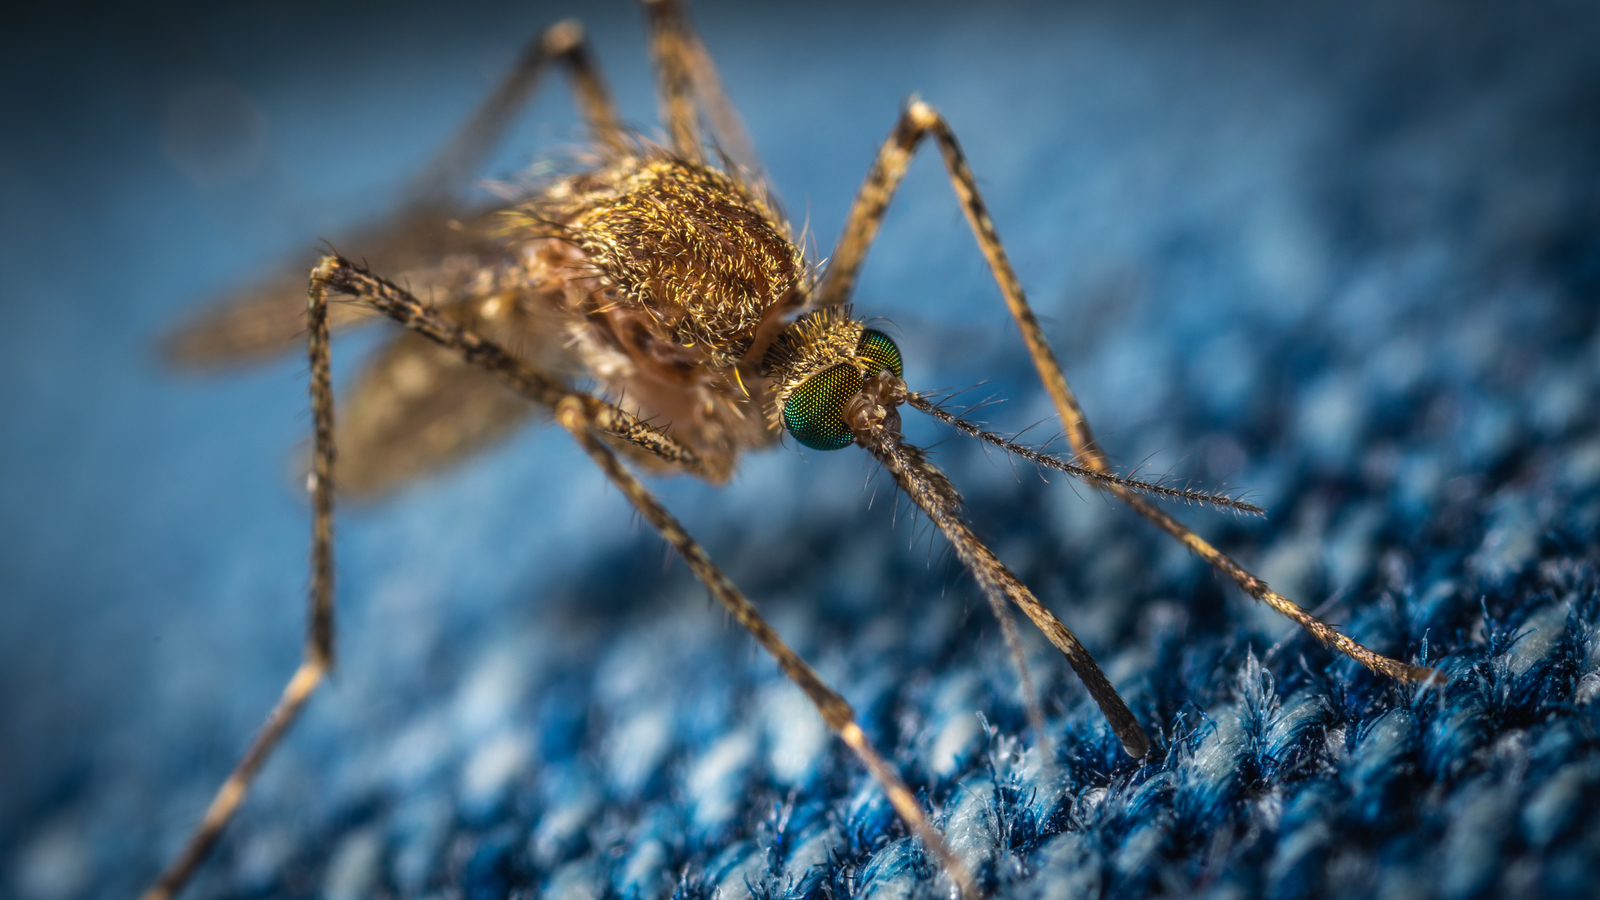 Mosquito on jeans - My, Macro, Macrohunt, Insects, Dipteran, Mosquitoes, Mp-e 65 mm, Macro photography